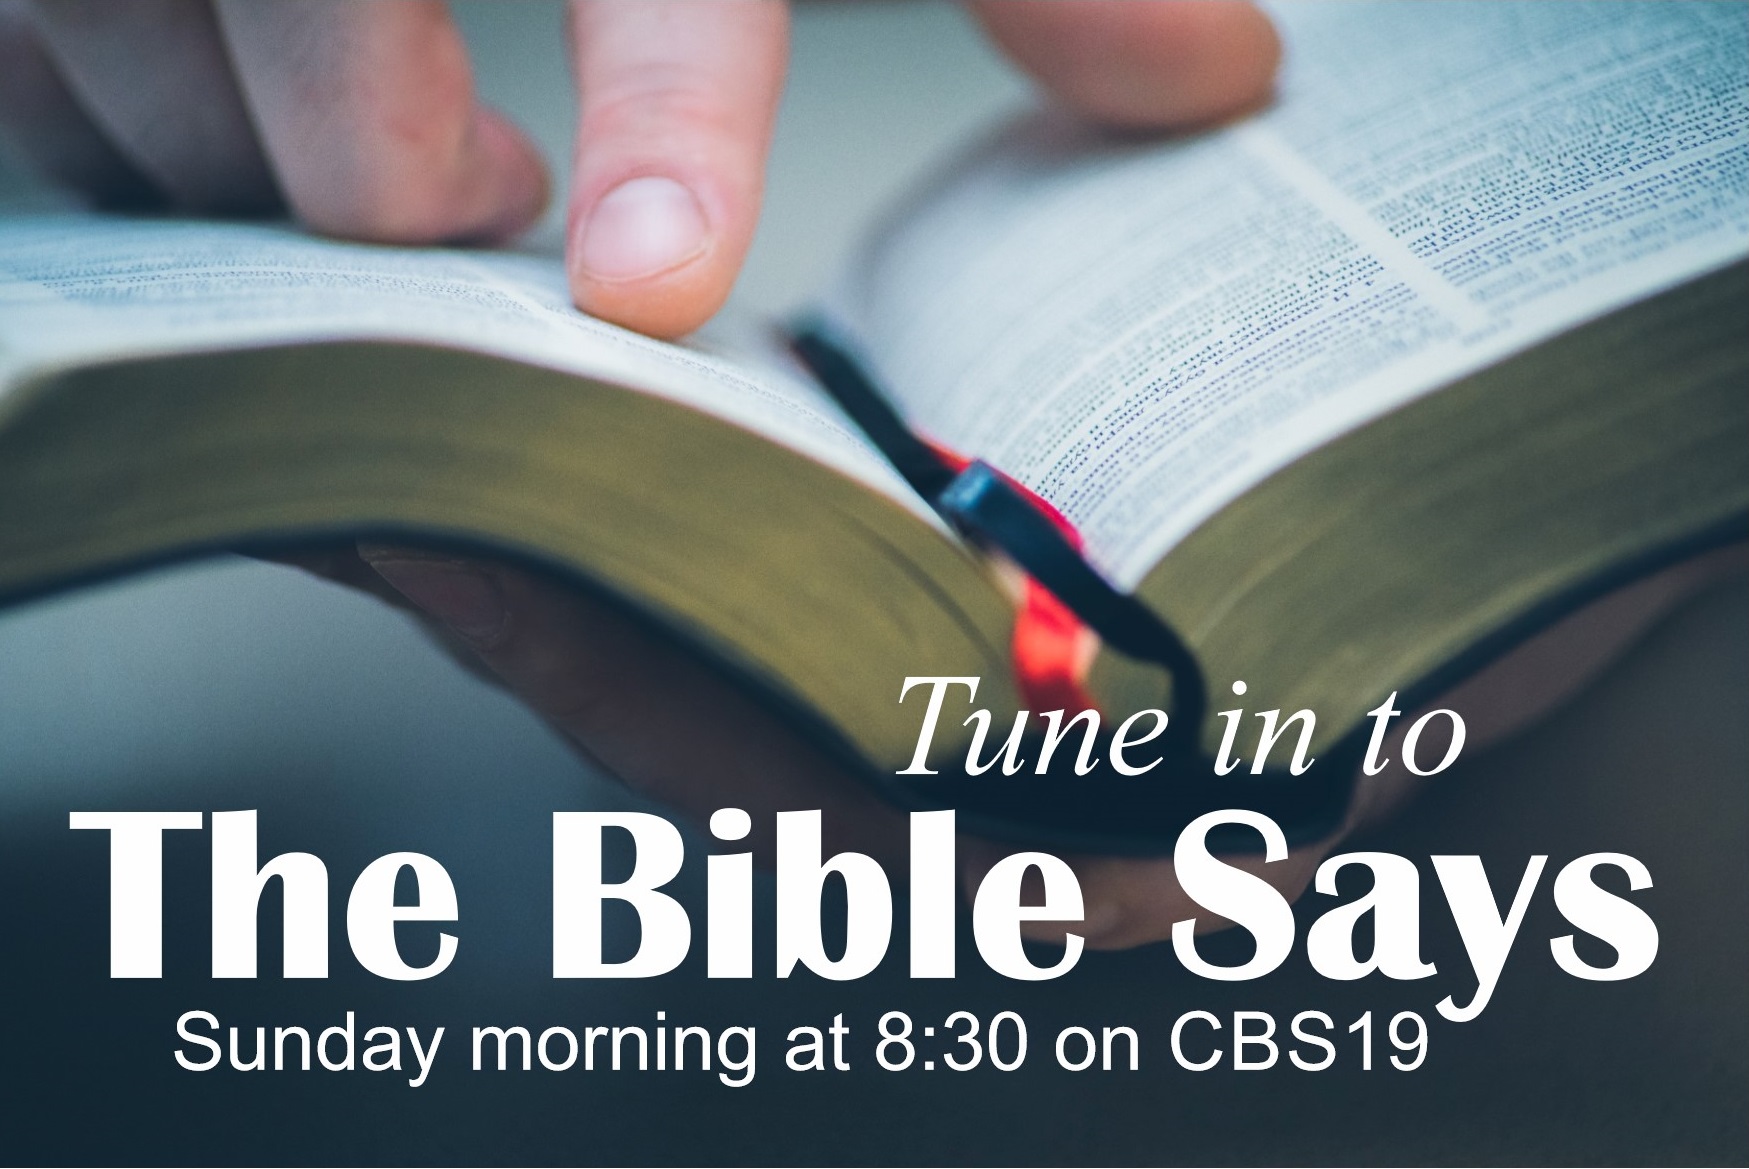 Tune in to The Bible Says Sunday Morning at 8:30 on CBS19